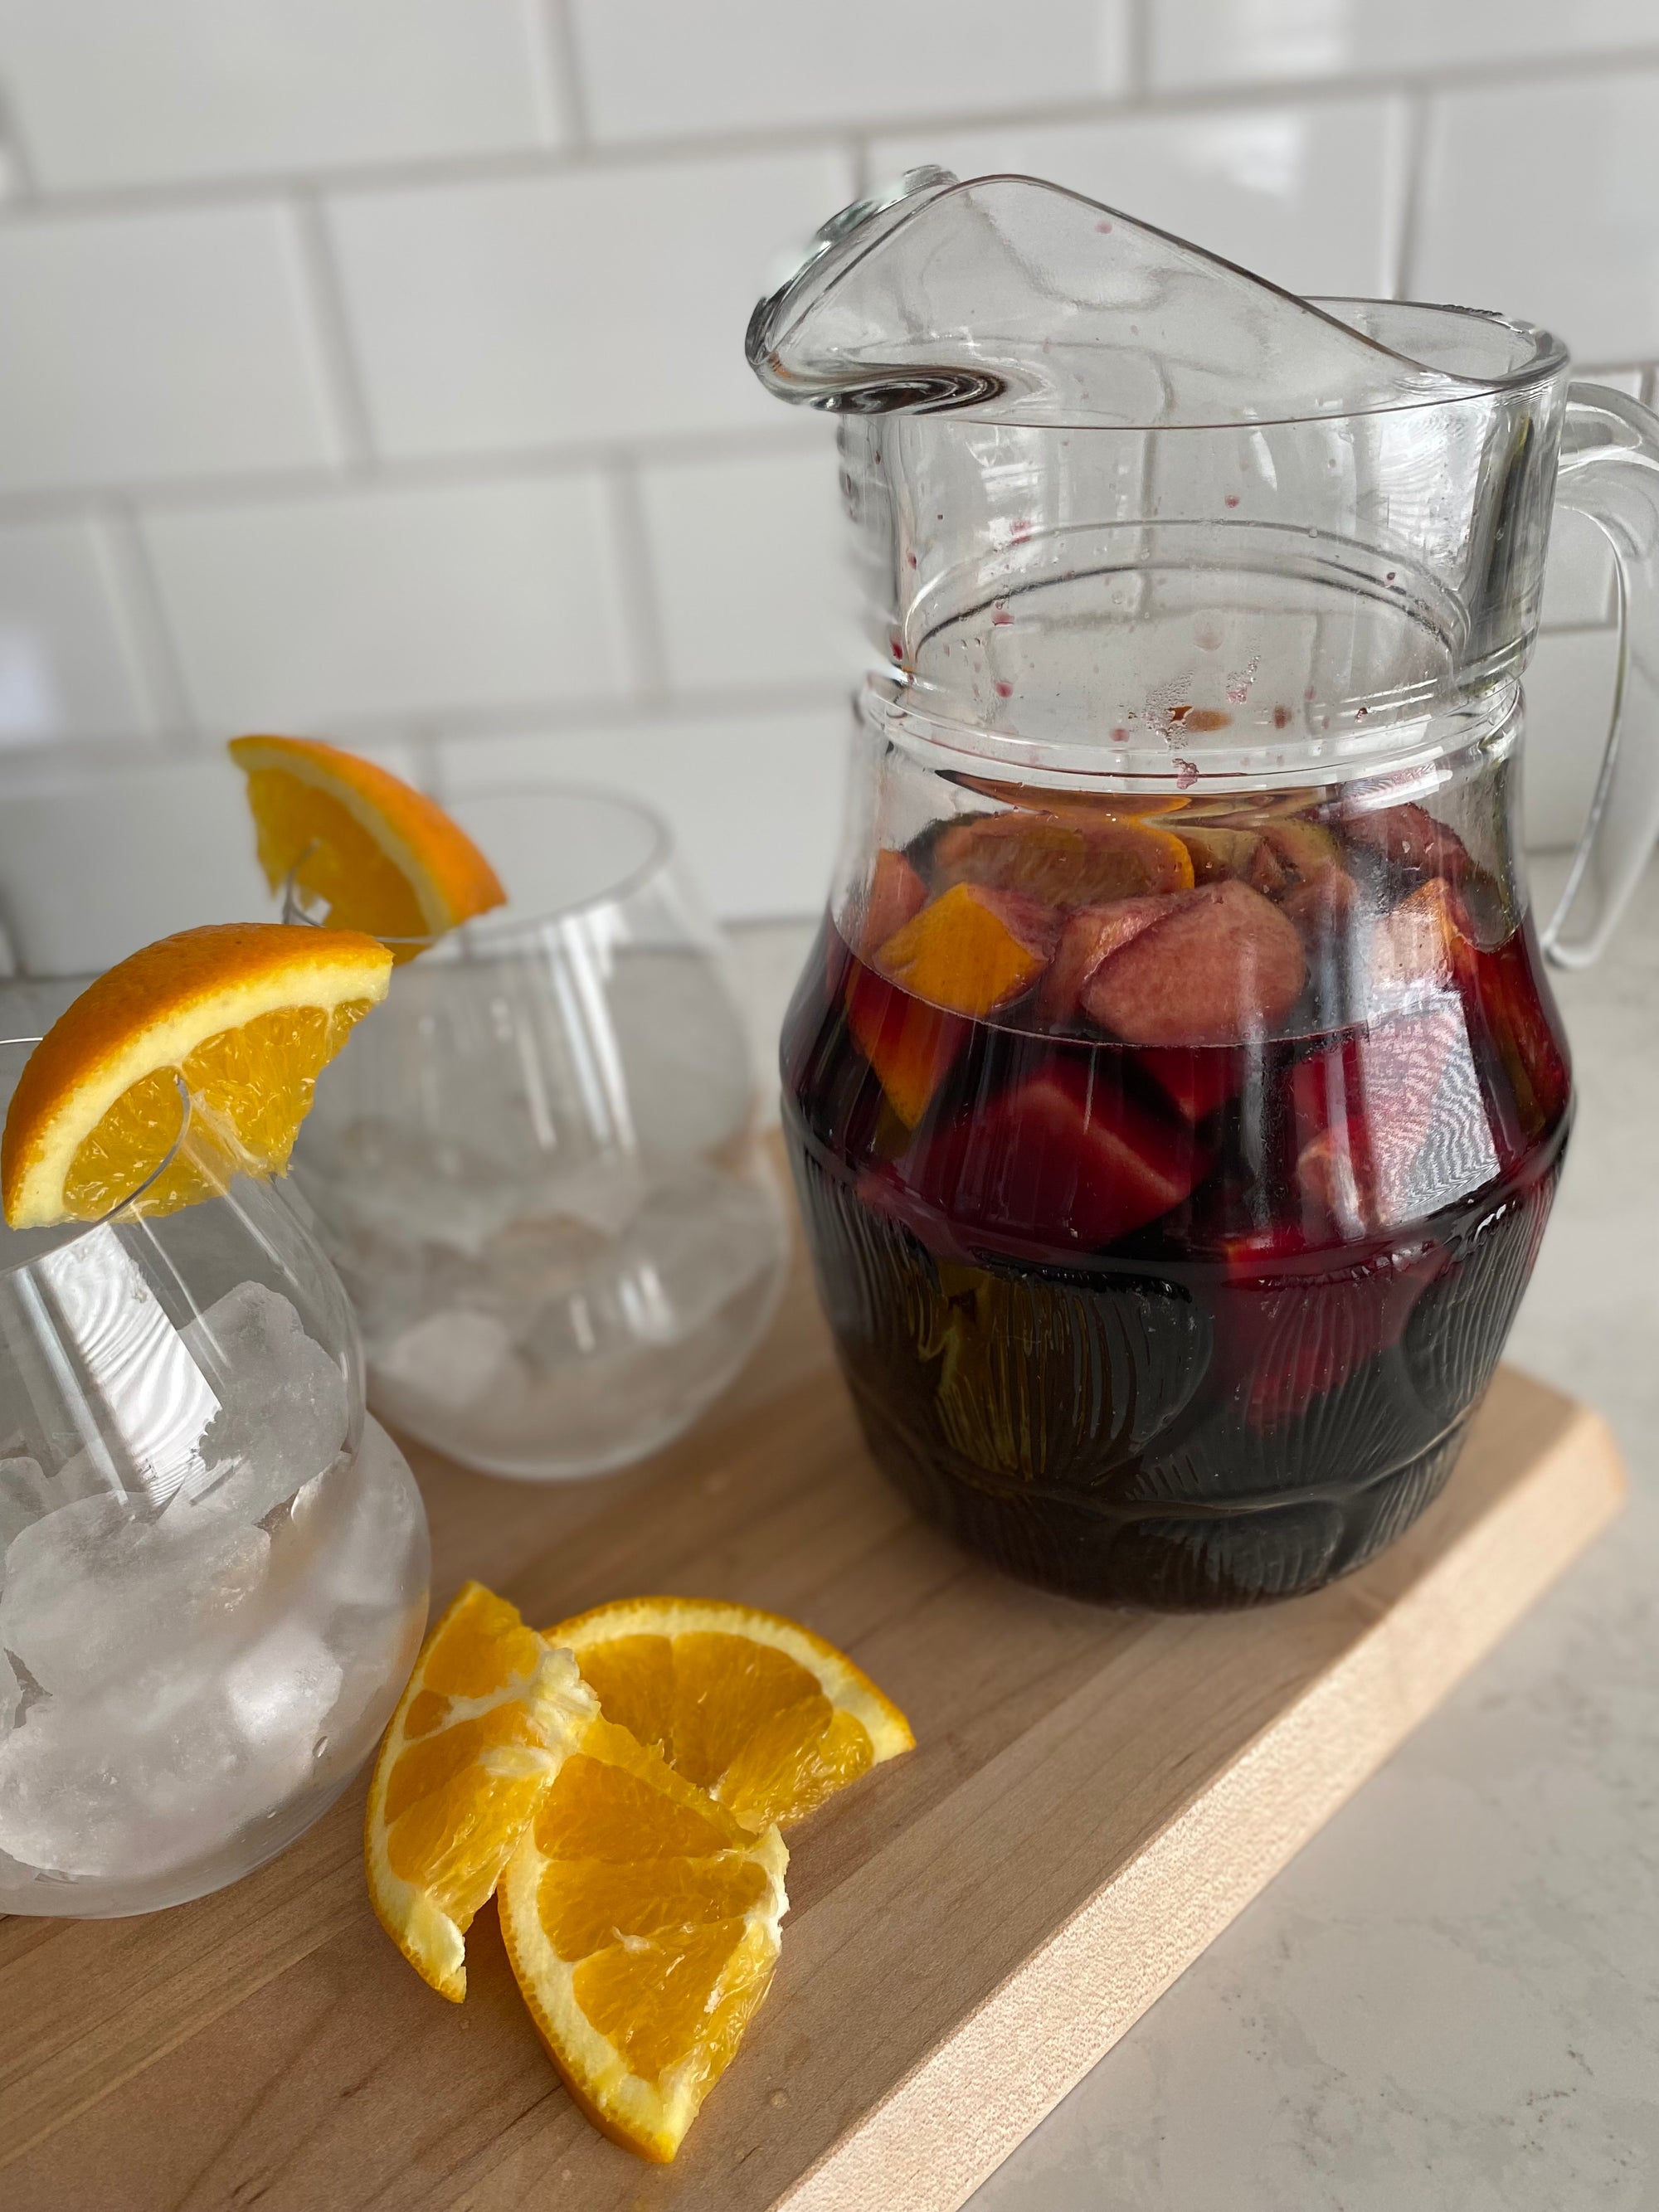 It's Sangria Time!